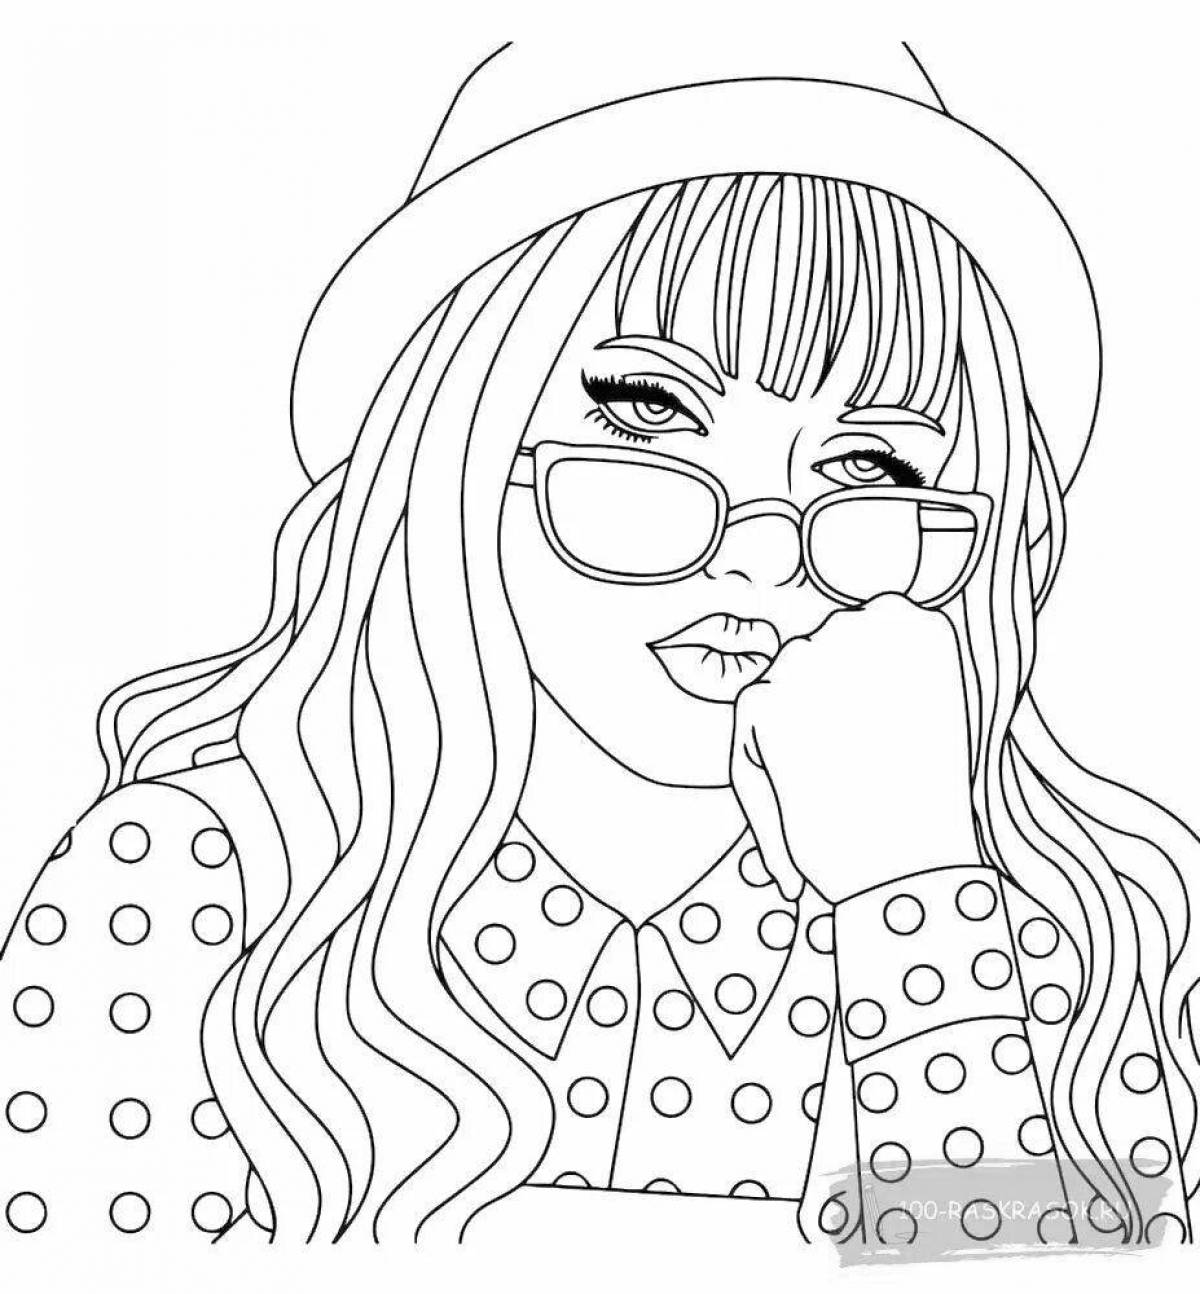 Charming girl coloring book